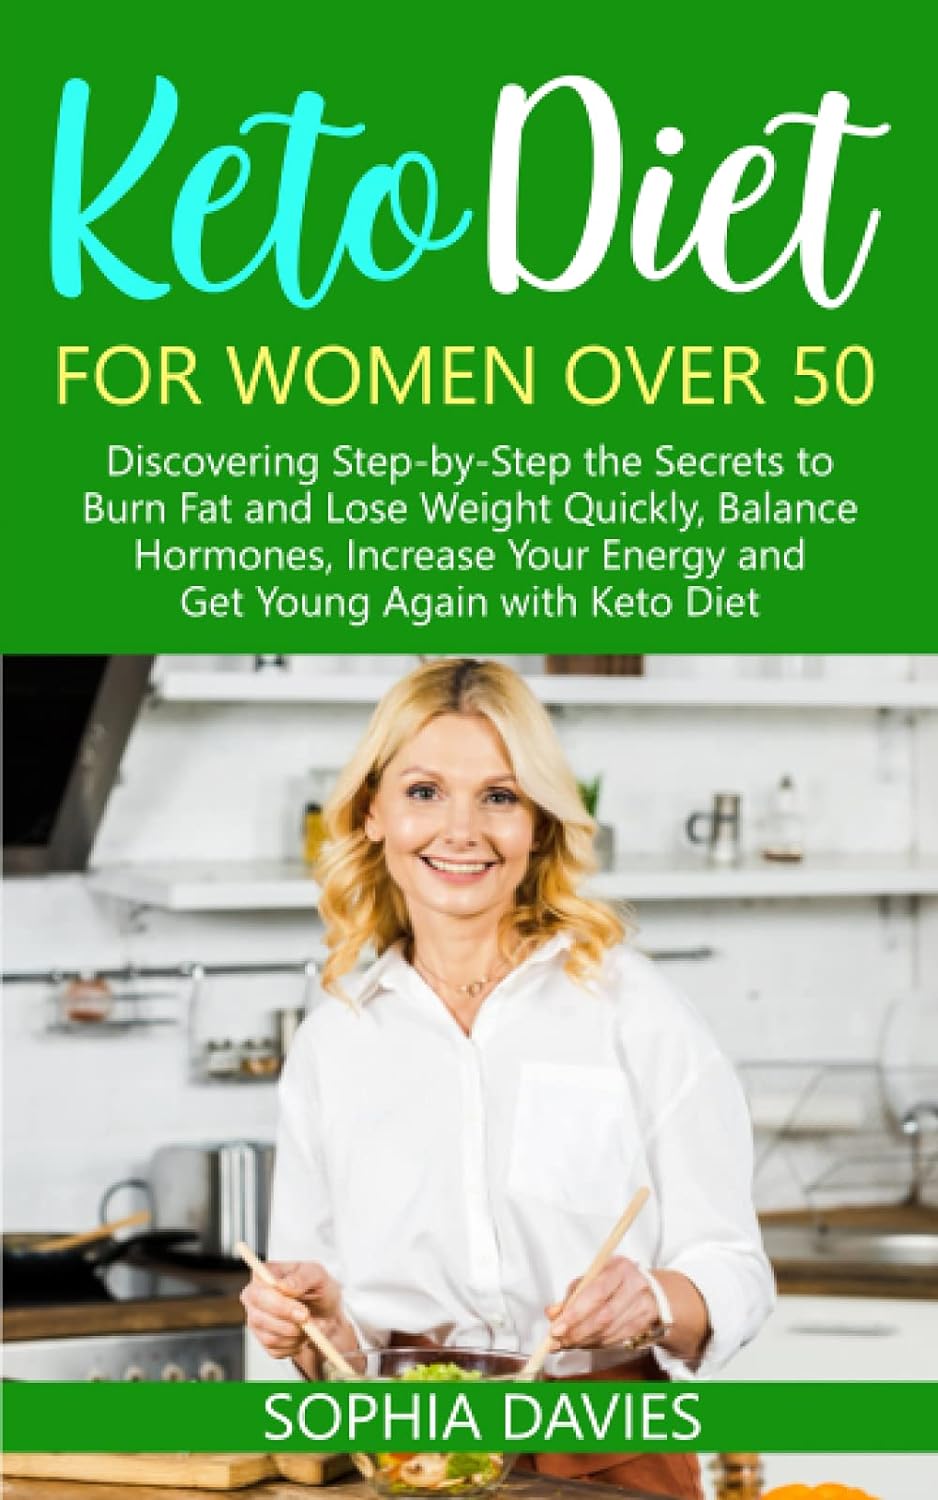 Step Secrets to Burn Fat Lose Weight Quickly Balance Horm - Florida - Hollywood ID1525214